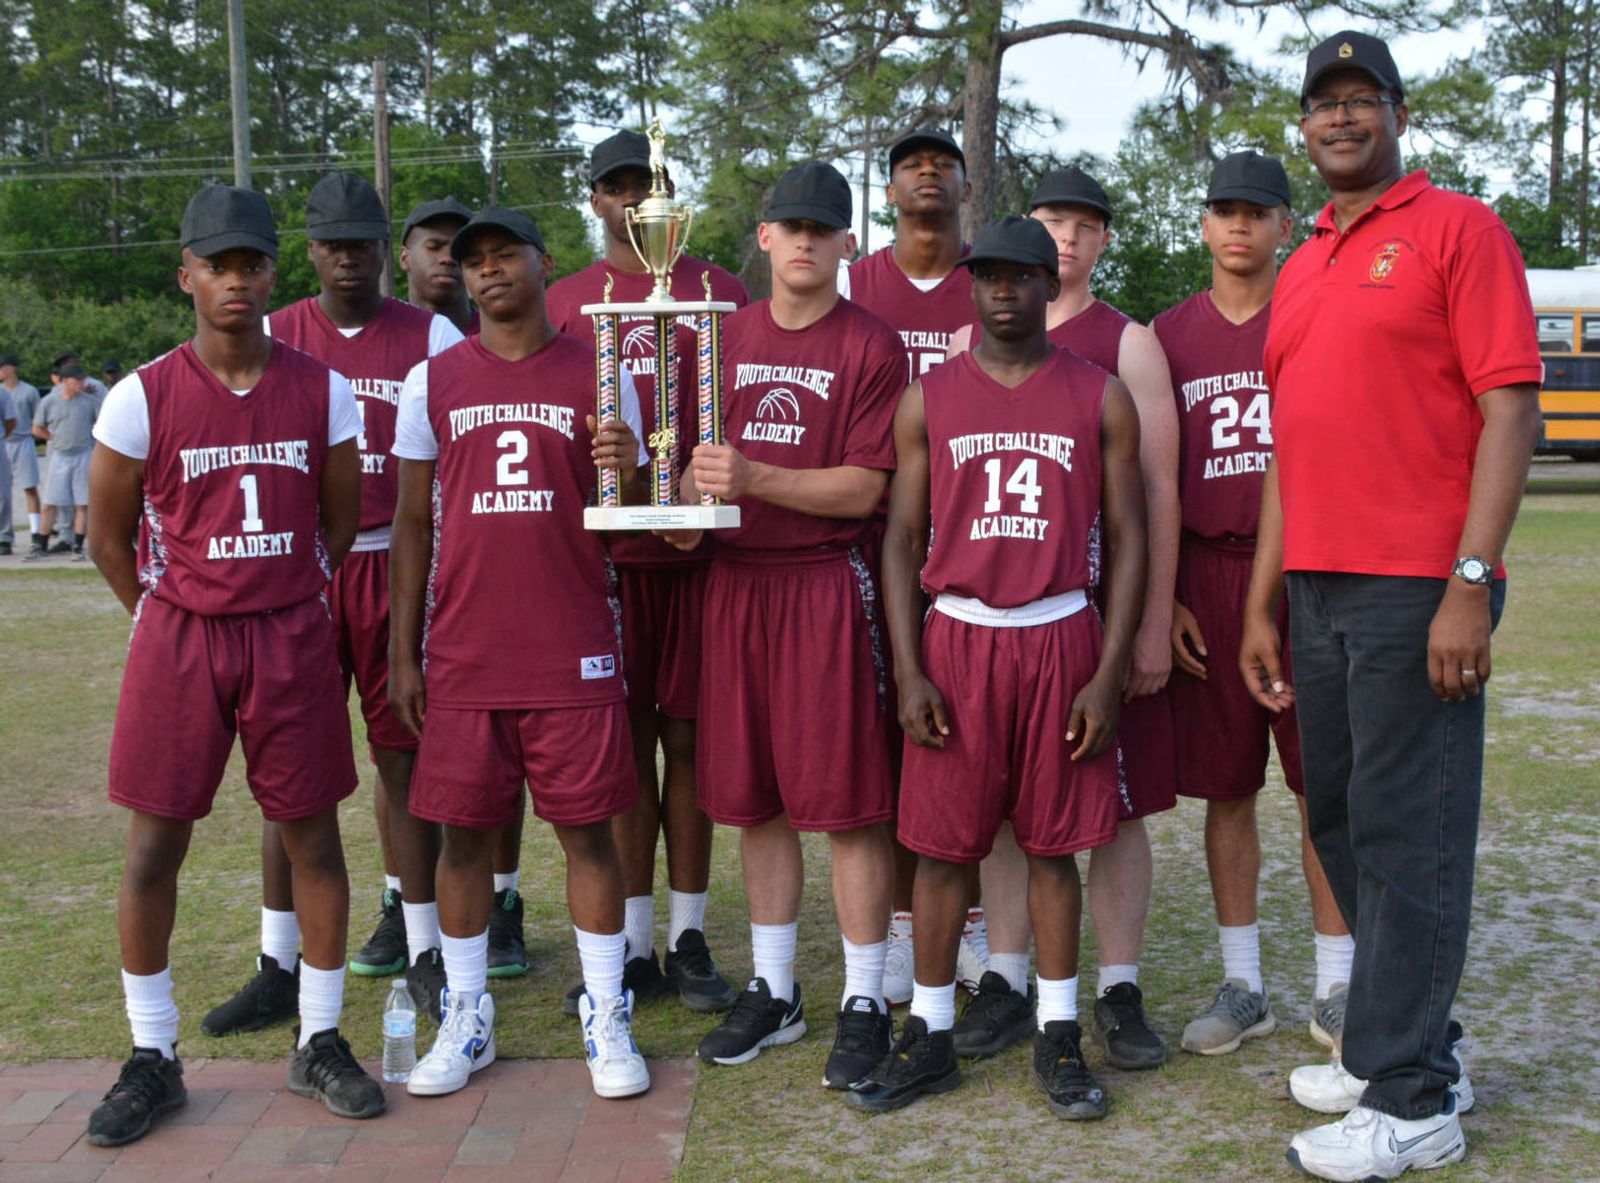 A cadet team with a trophy